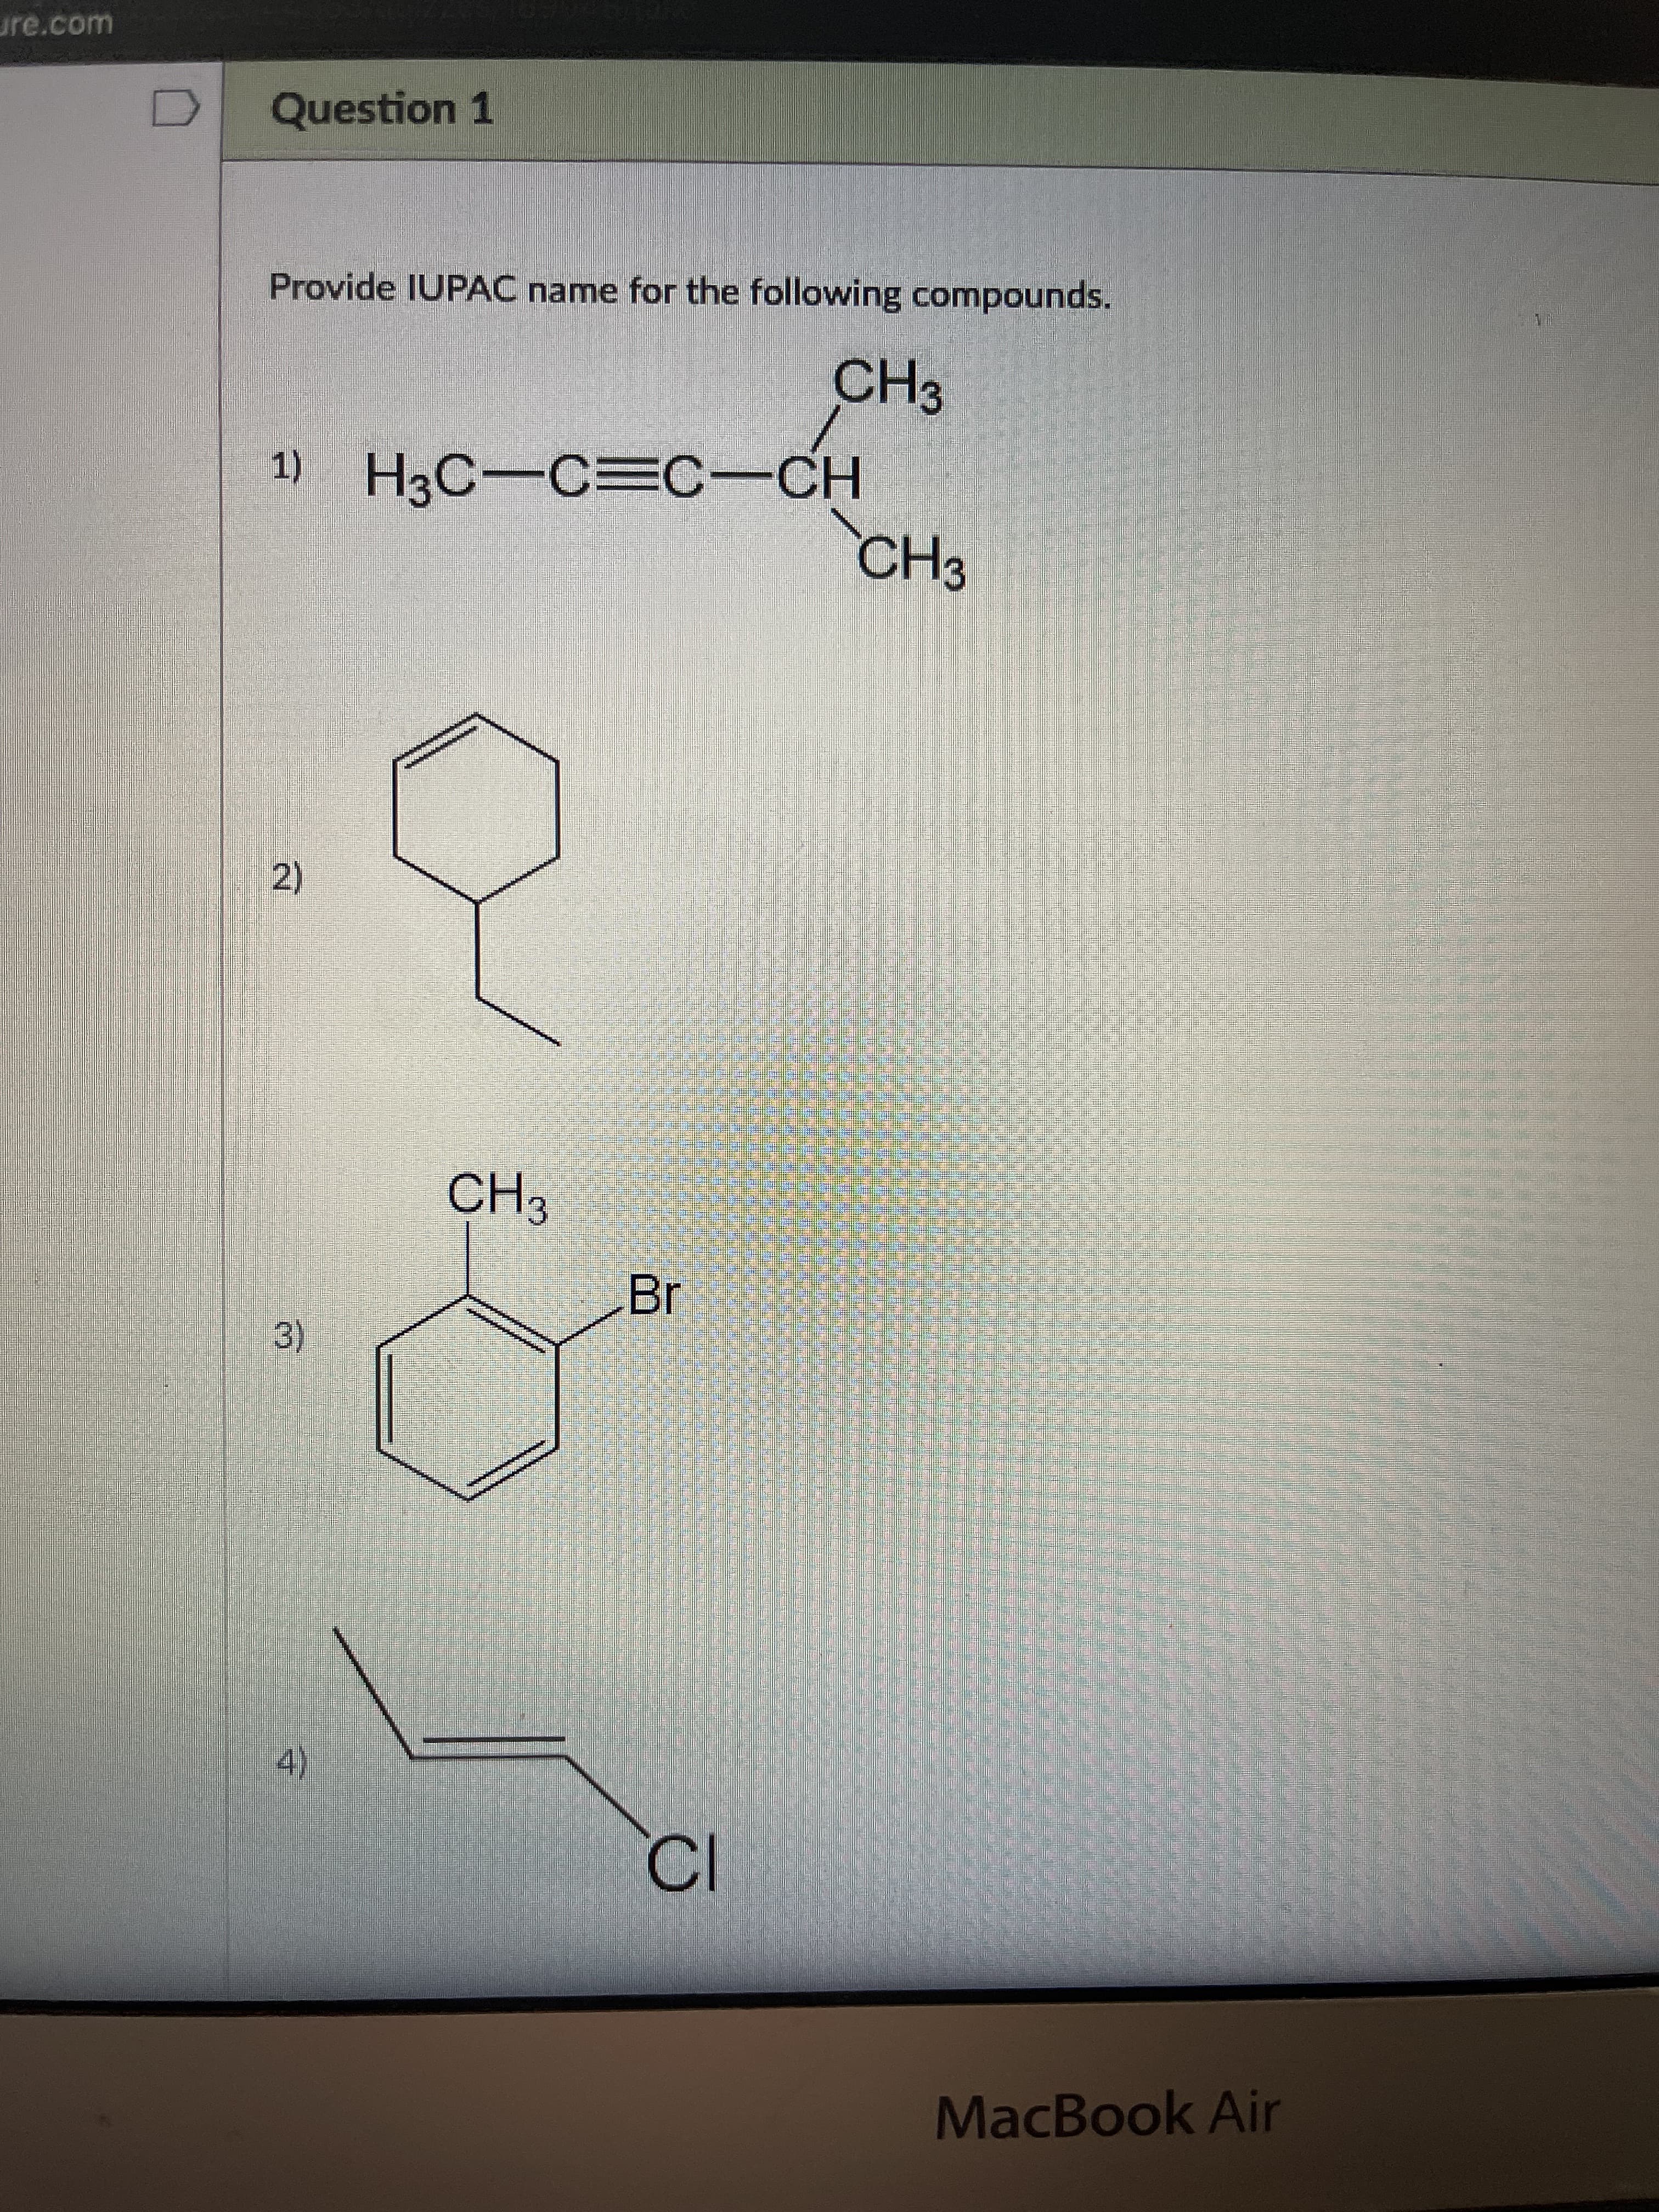 BY
3)
守
ure.com
Question 1
Provide IUPAC name for the following compounds.
CH3
H3C-C=C-CH
CH3
2)
CH3
4)
MacBook Air
